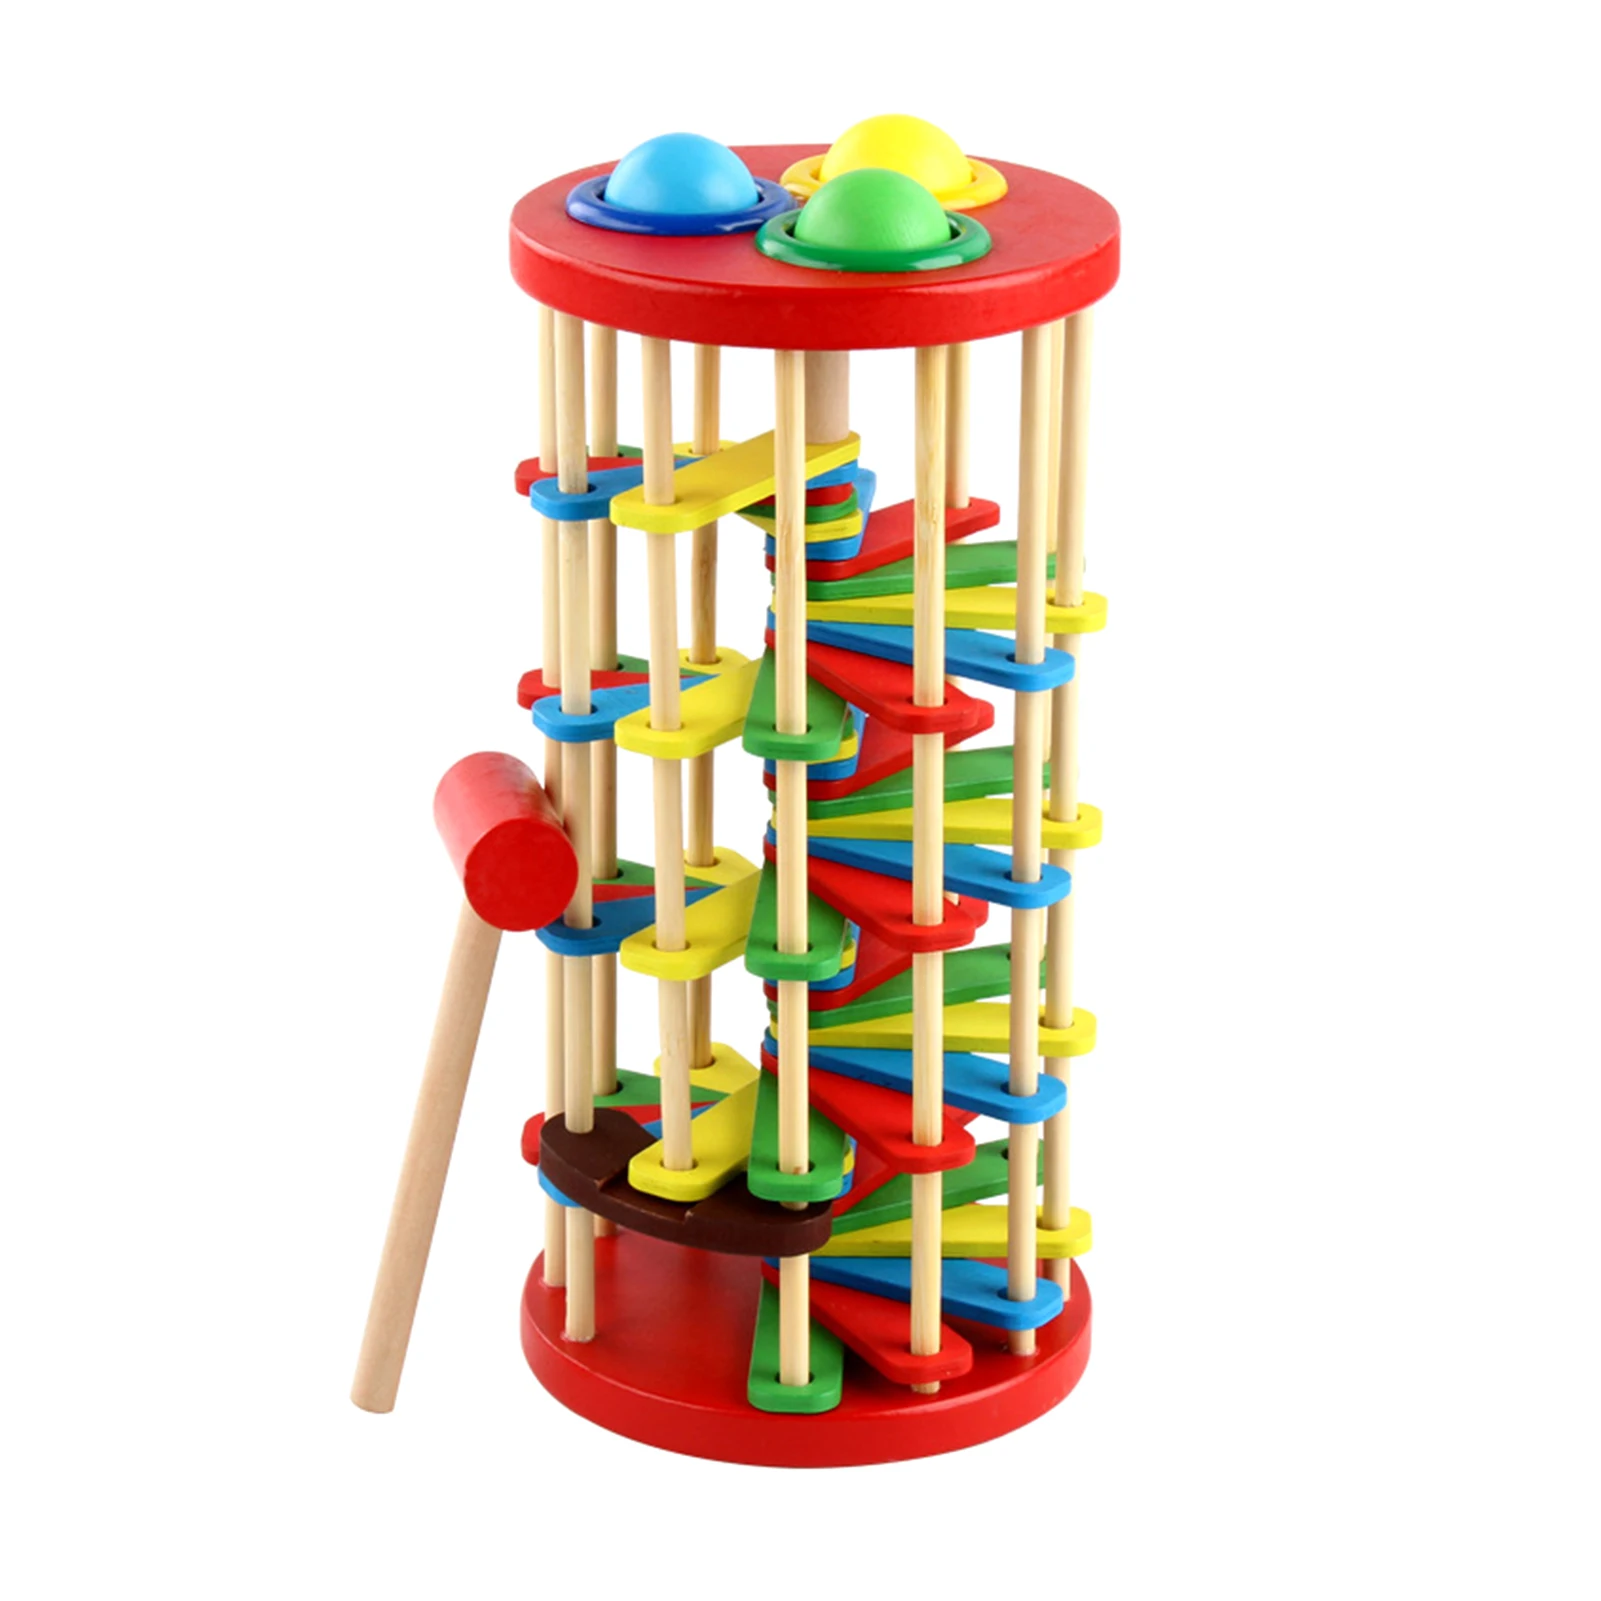 

Ball Toy Set For Toddlers Kids Fun Drop Birthday Fall Stairs Educational Knocking Colorful Gifts Early Learning Montessori